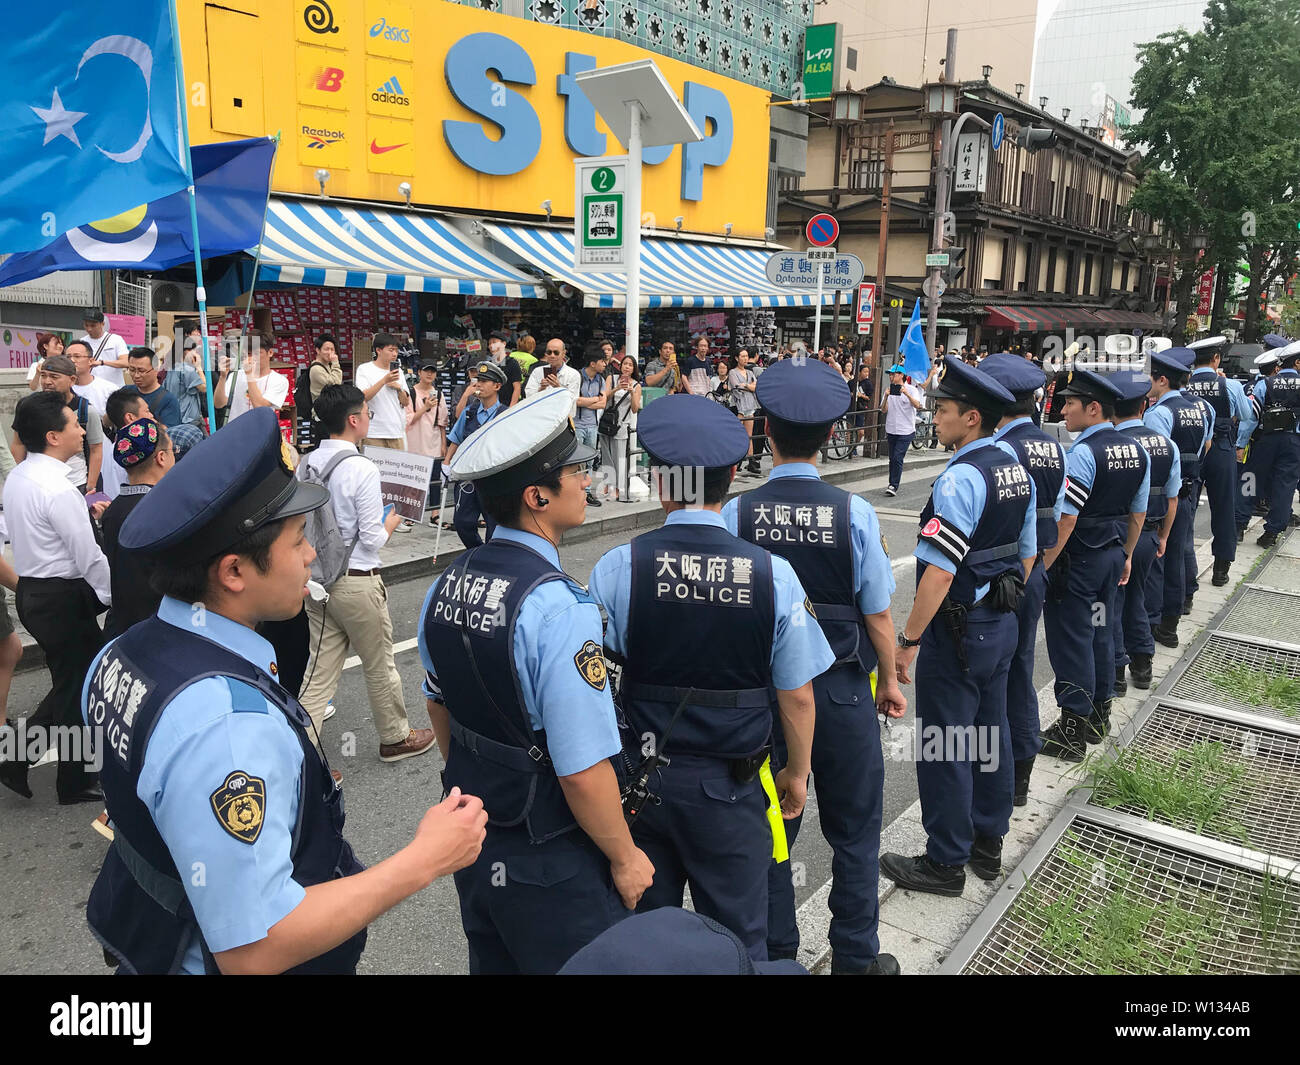 Osaka, Japan. 29th June, 2019. A group of police officers direct the  traffic of a protest in Osaka Japan where at the same time the Osaka G20  summit was taking place. Osaka